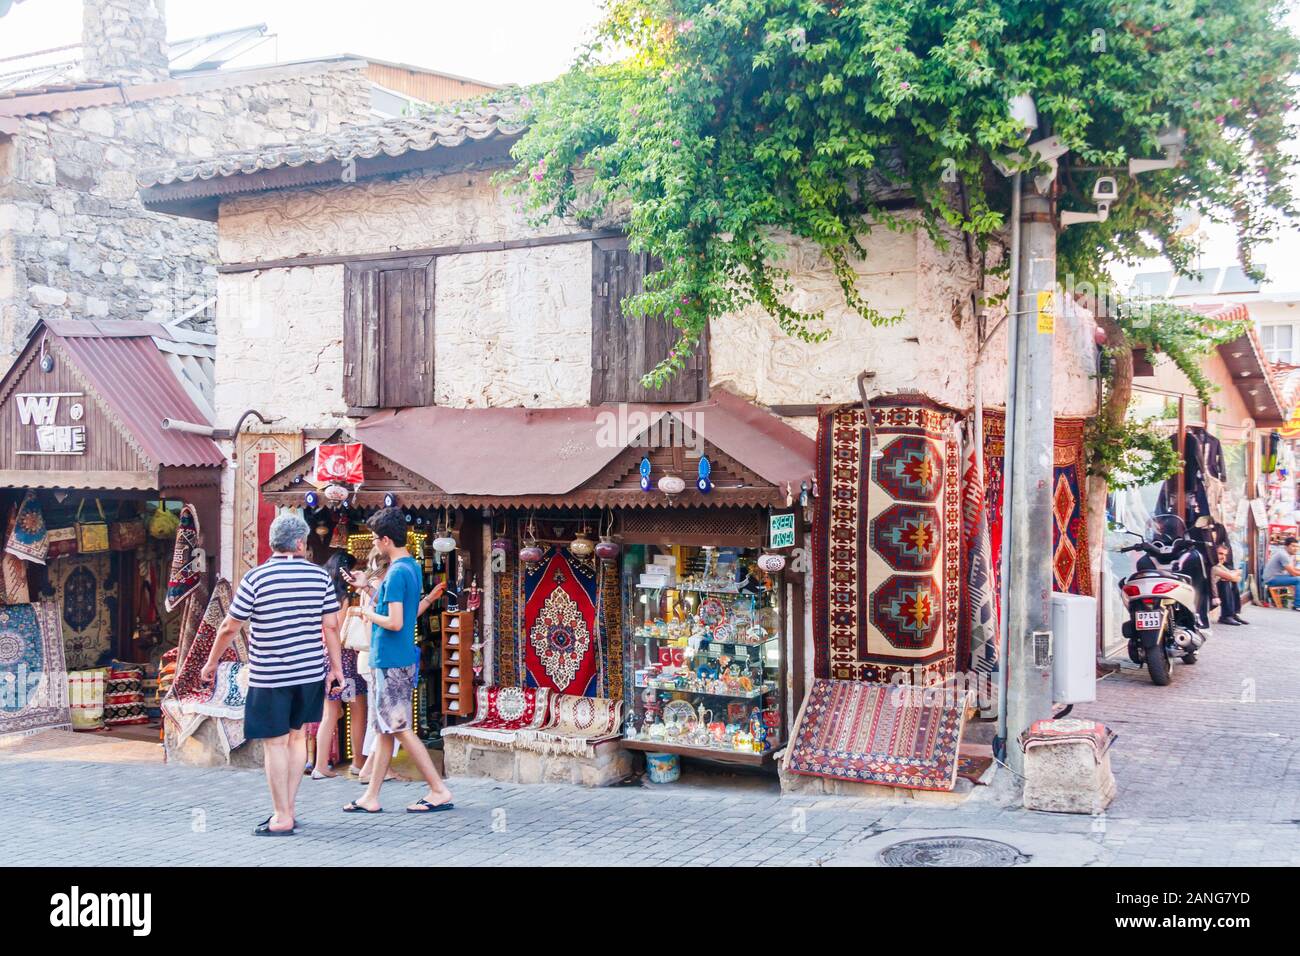 Side, Turkey - September 9th 2011: Tourists walking past a shop selling souvenirs and carpets. The town is a popular tourist destination. Stock Photo